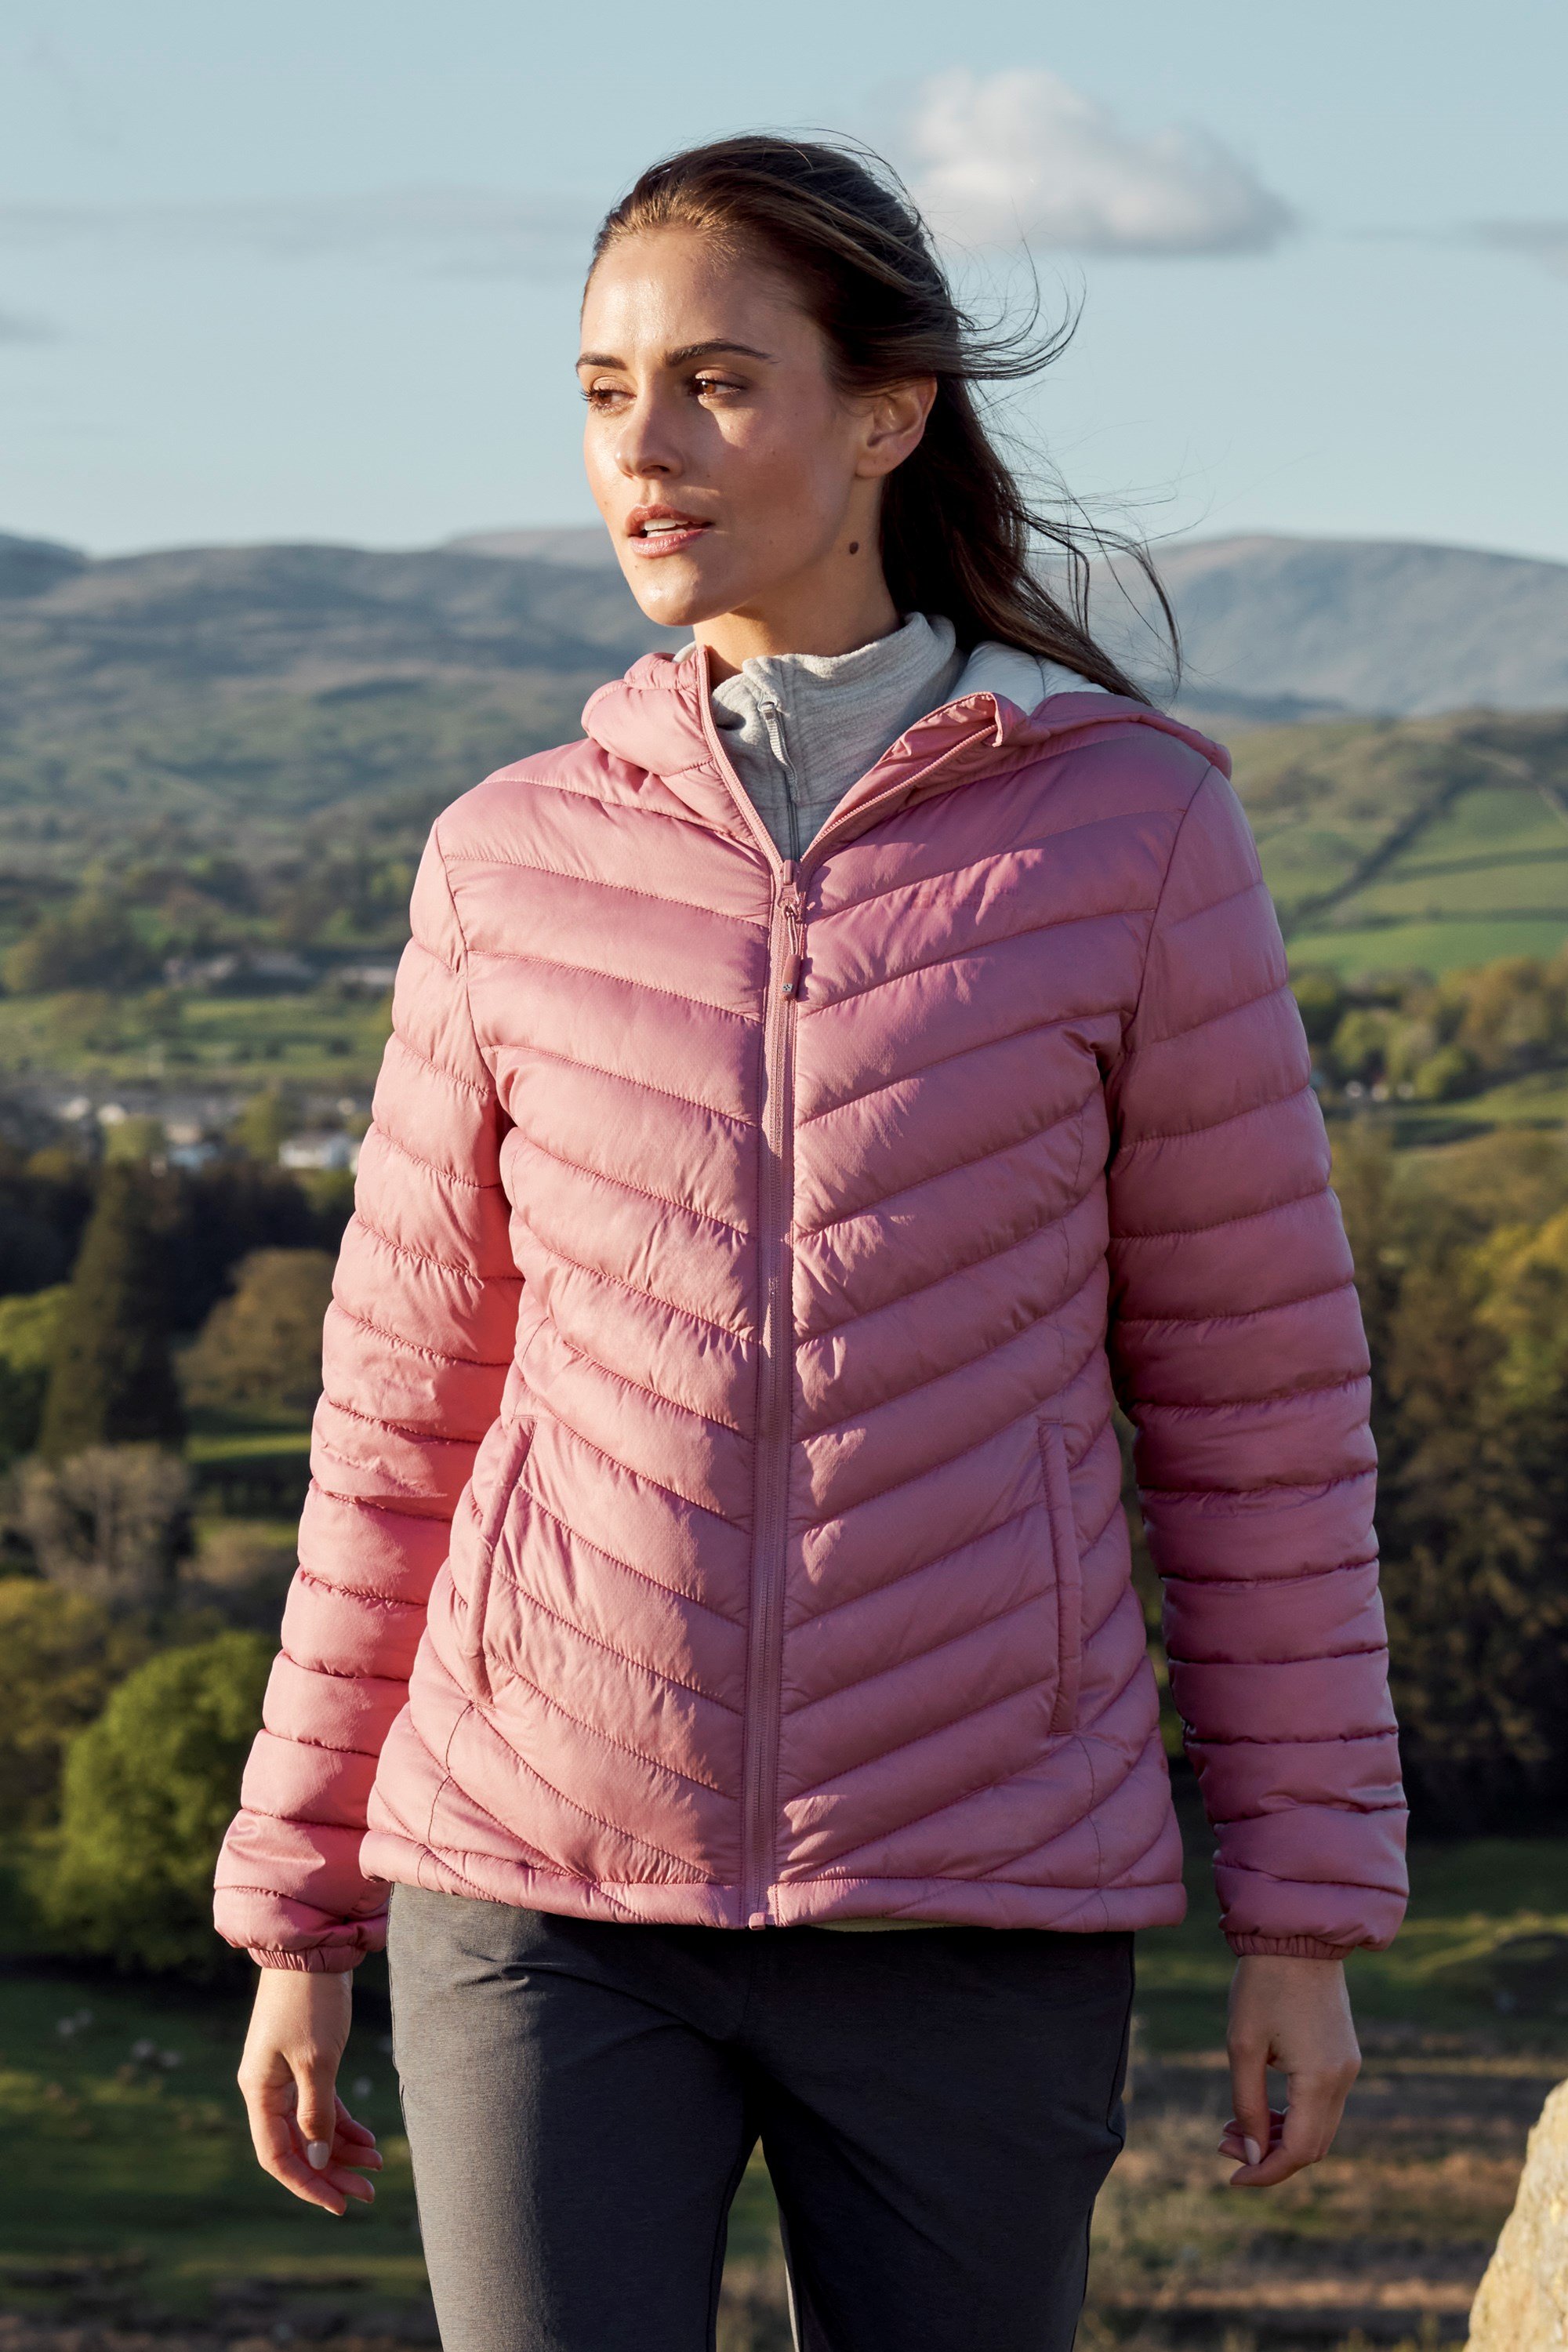 Womens Gabellia Jacket: Search Results For Womens Gabellia Jacket on ...